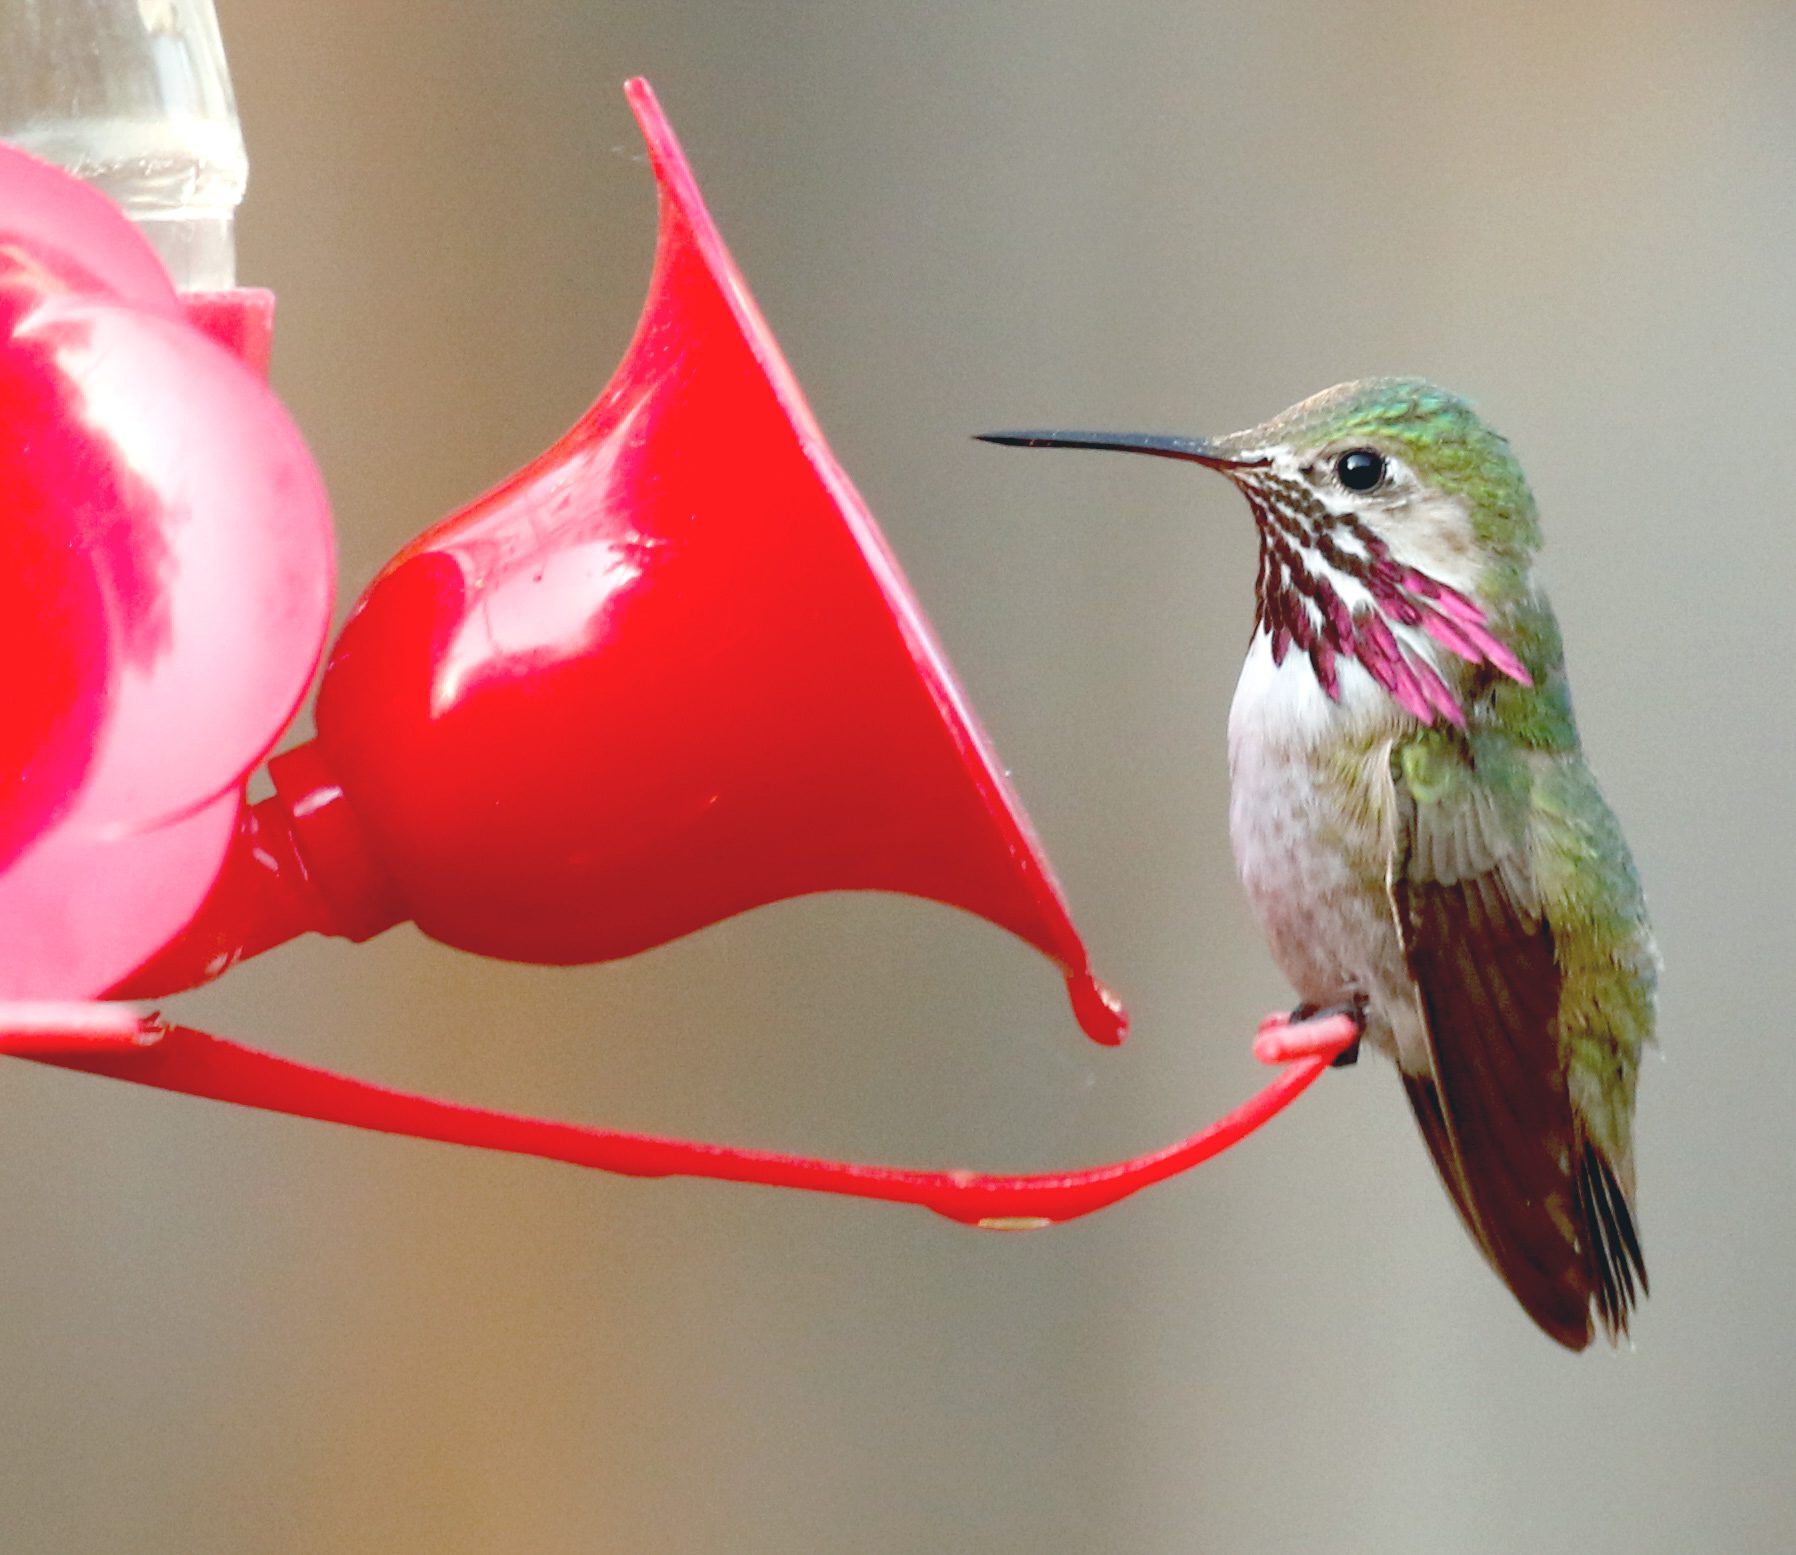 A Calliope Hummingbird considers a "giant flower" on a hummingbird feeder full of sugar water. Hummingbirds will defend territories around these sugar-rich feeders. Photo by Jeremiah Psiropoulos/Macaulay Library.